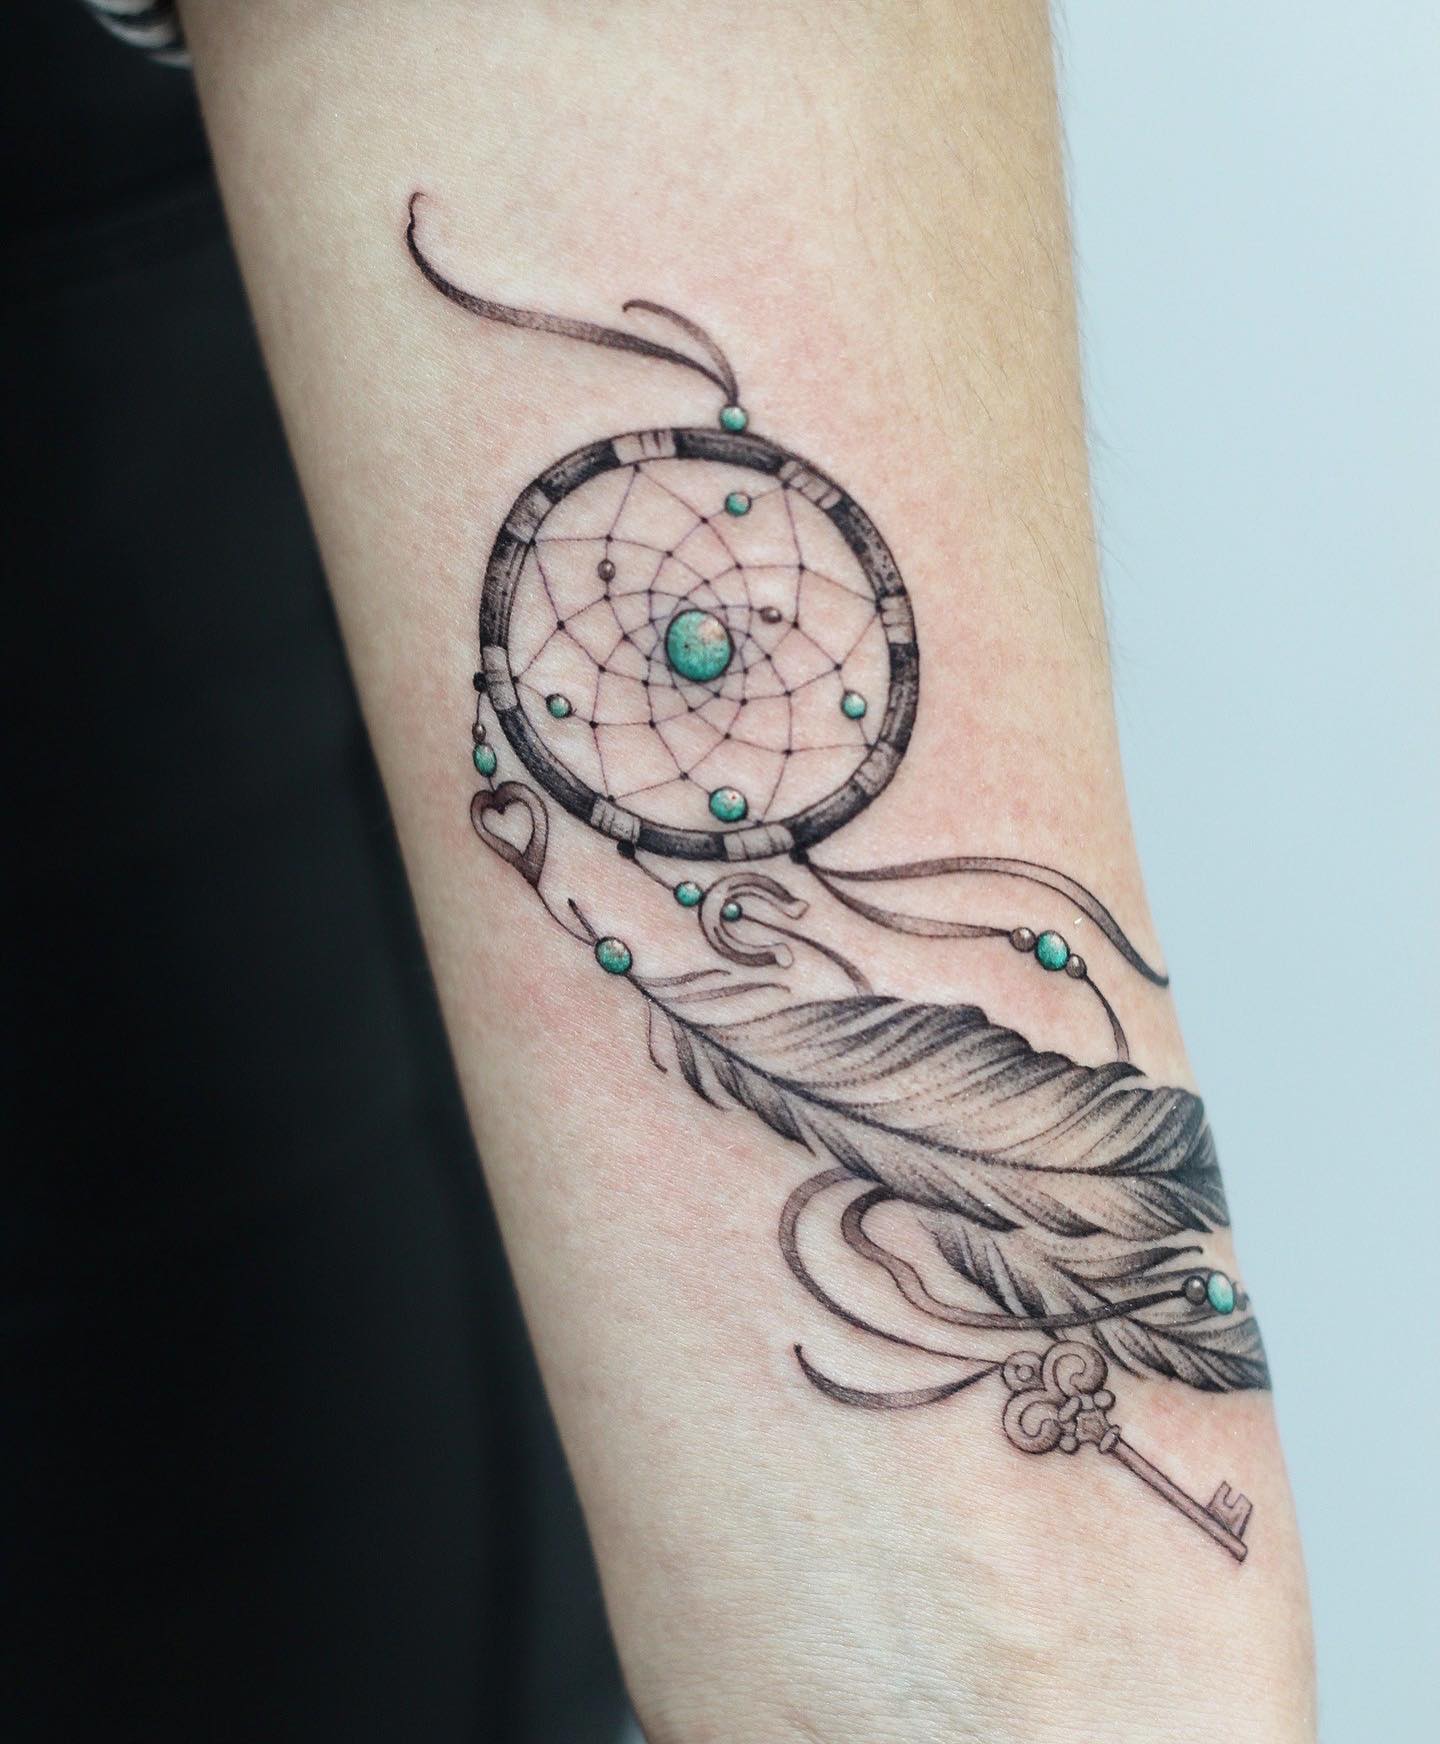 Green color represents freshness and growth and it is a great color to add to your beautiful dream catcher tattoo! Plus, if you want to decorate the feathers of it, a key, heart and magnet are great. These decorations represent the protection of the dream catcher since it keeps bad dreams away. 